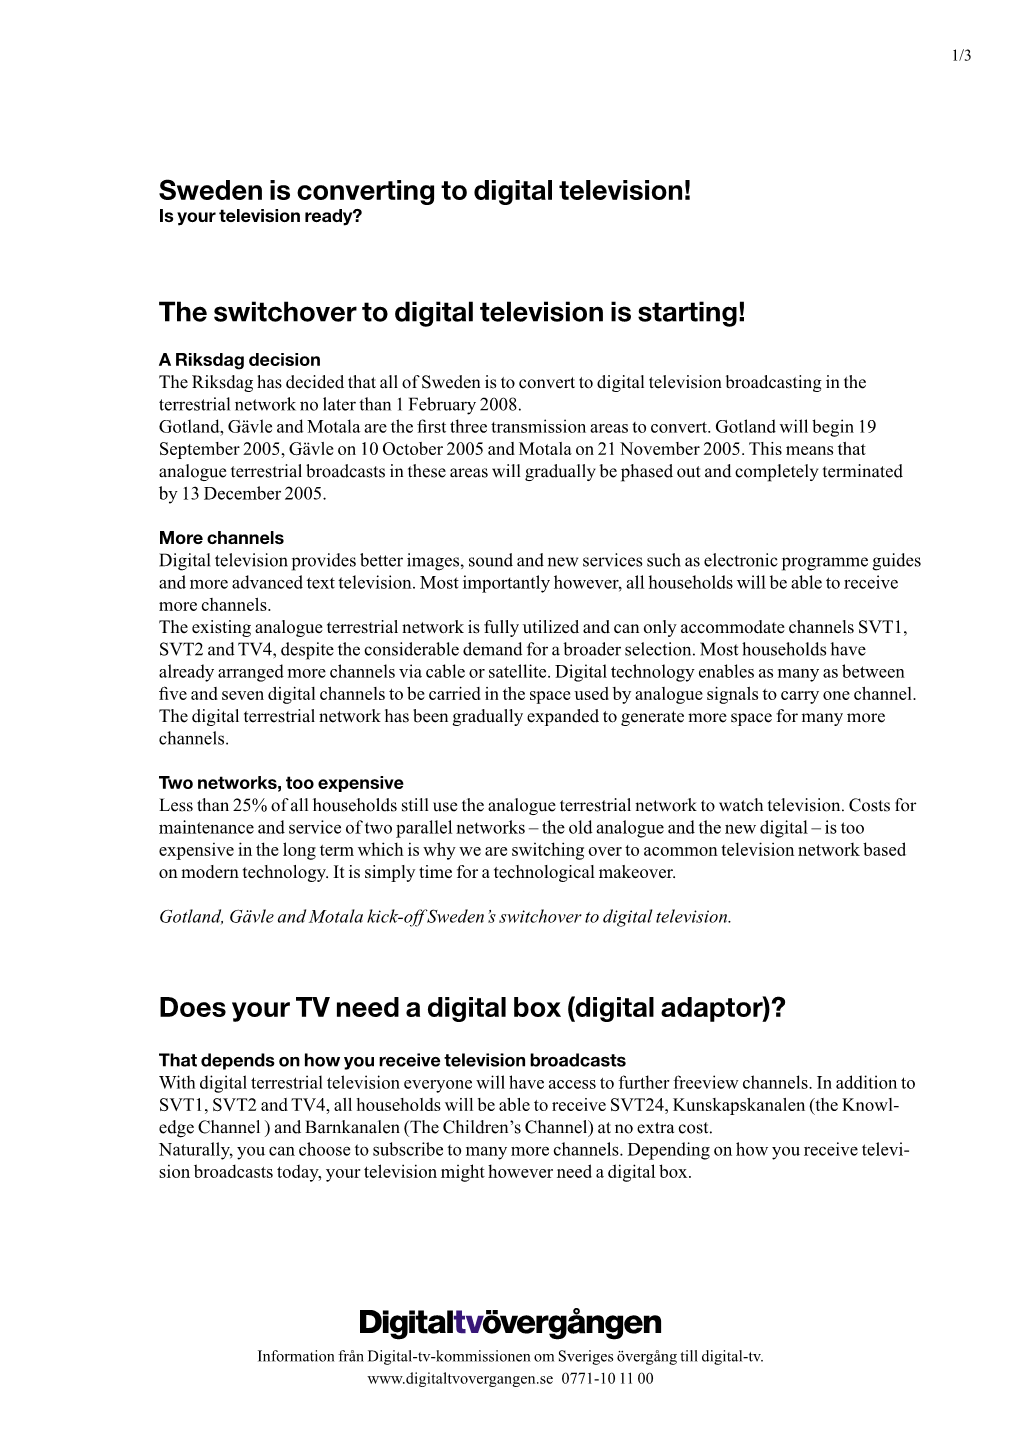 Sweden Is Converting to Digital Television! the Switchover to Digital